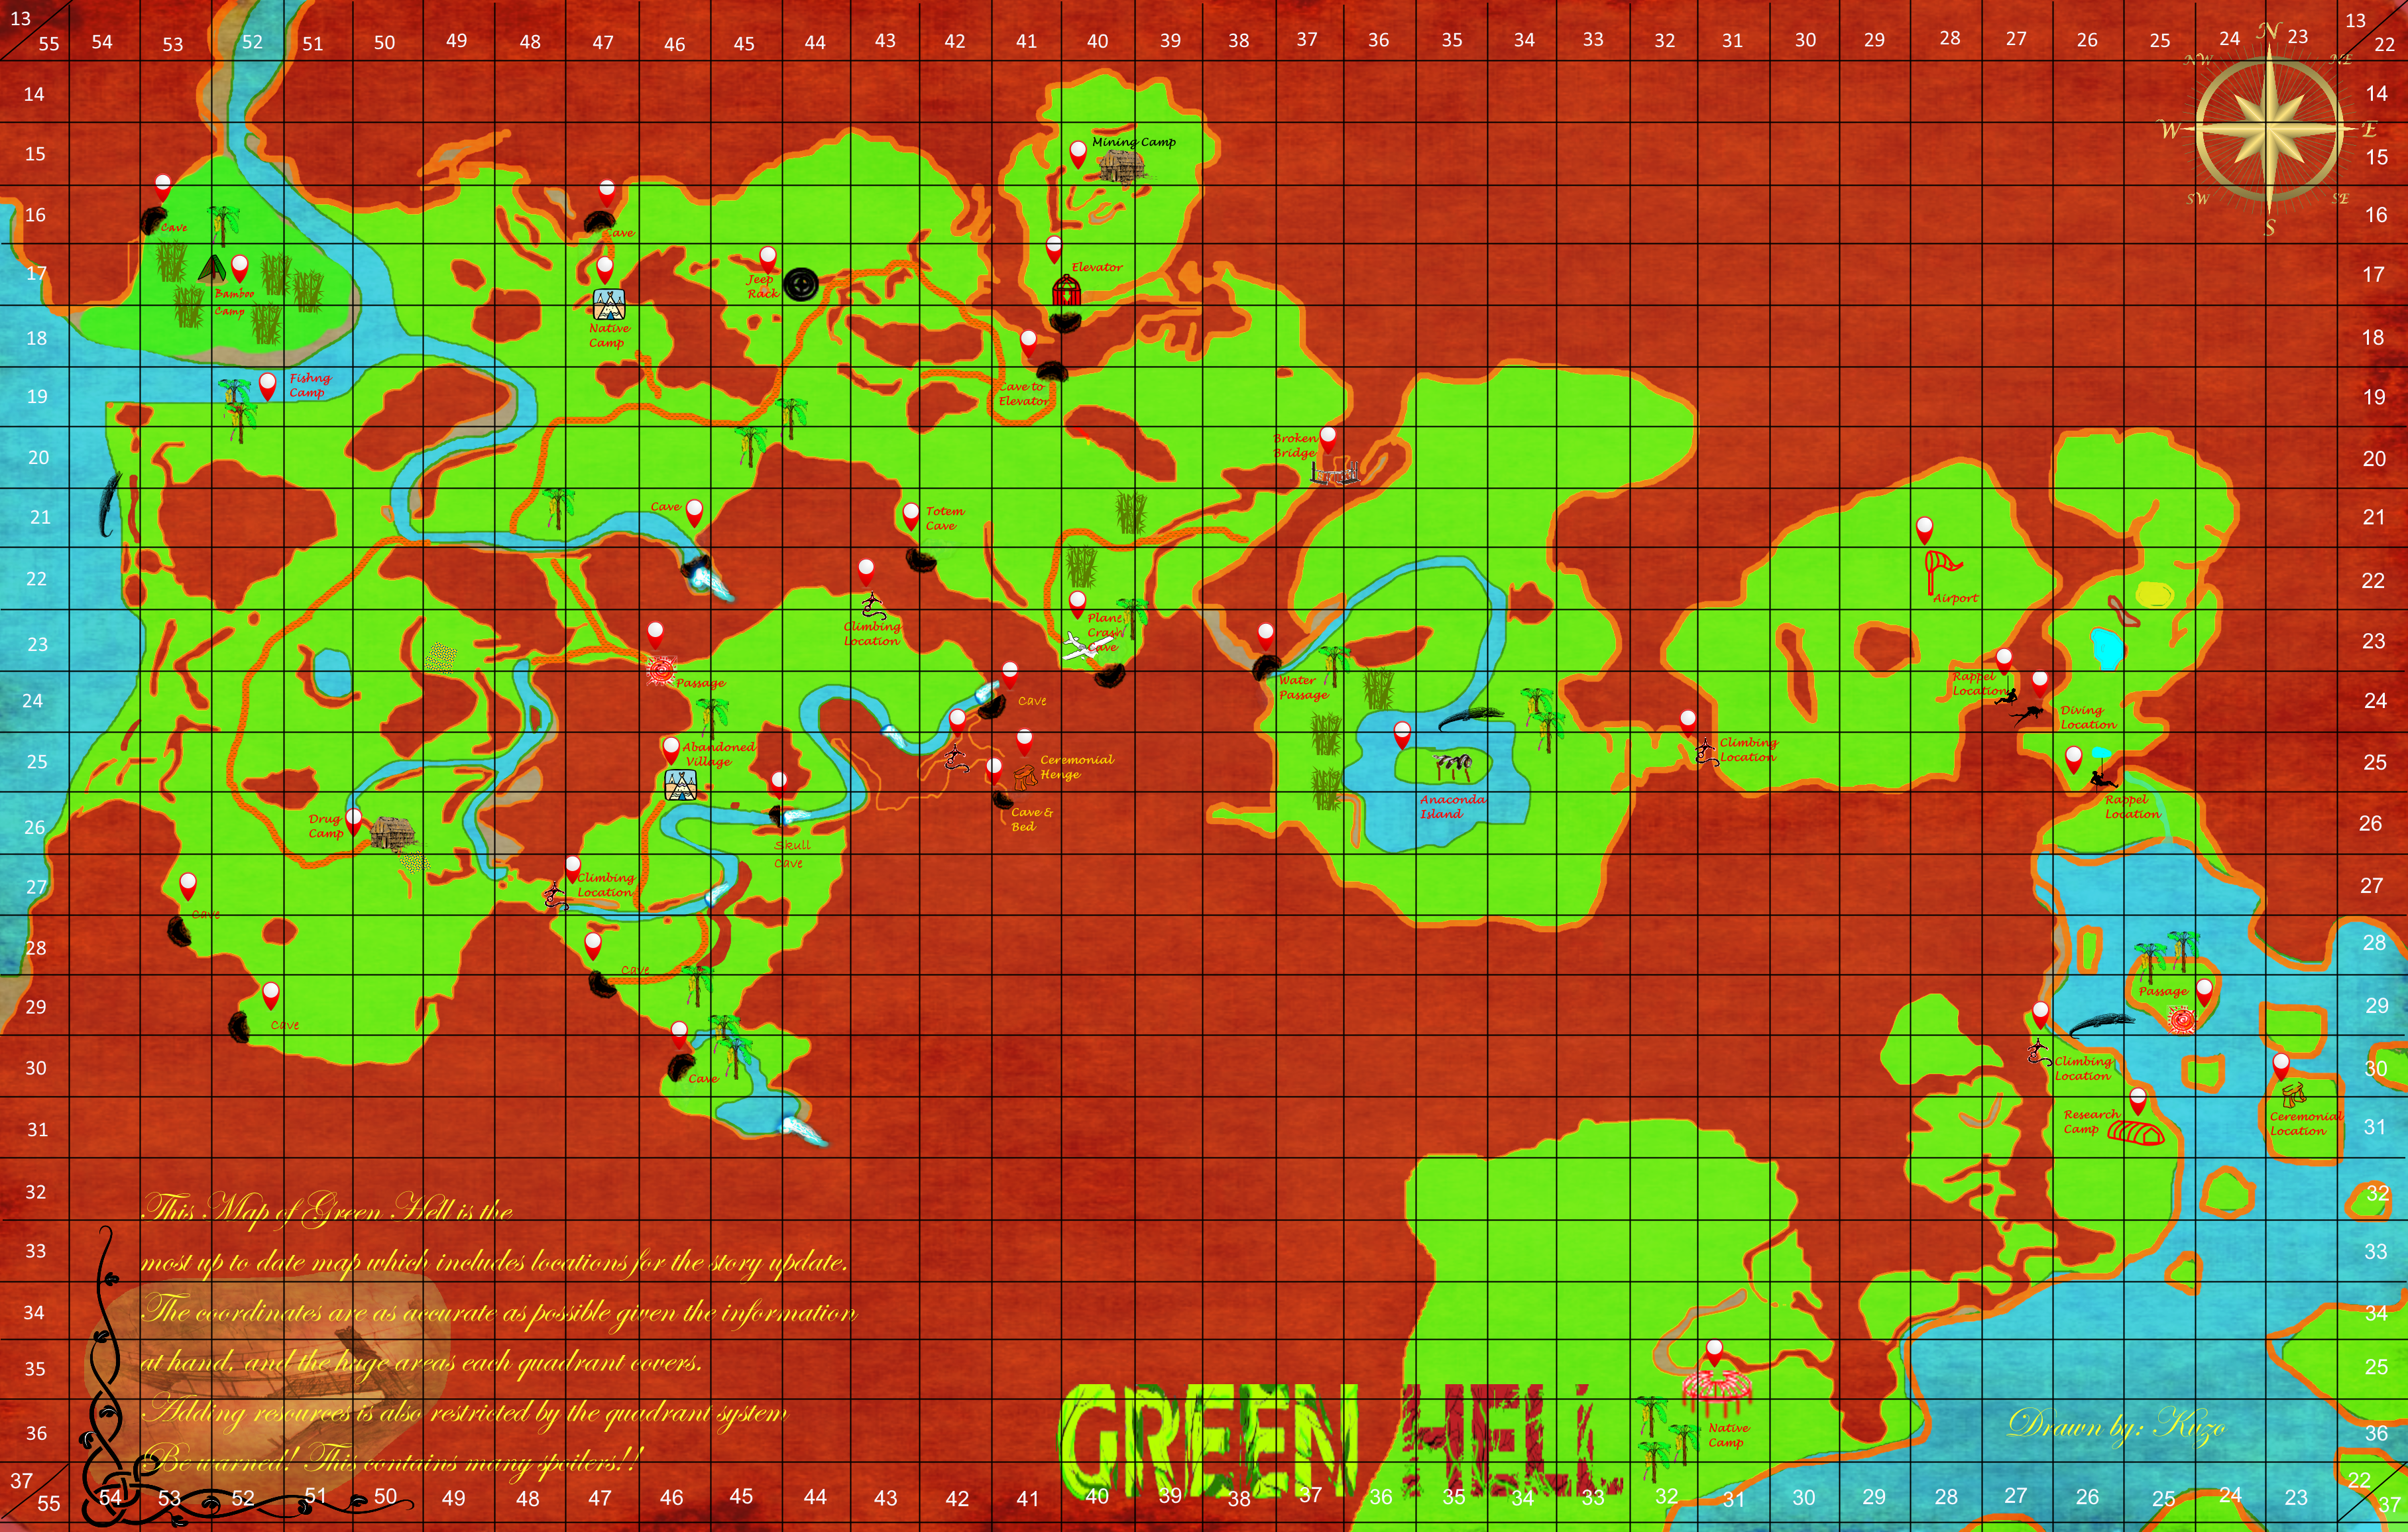 green hell locations